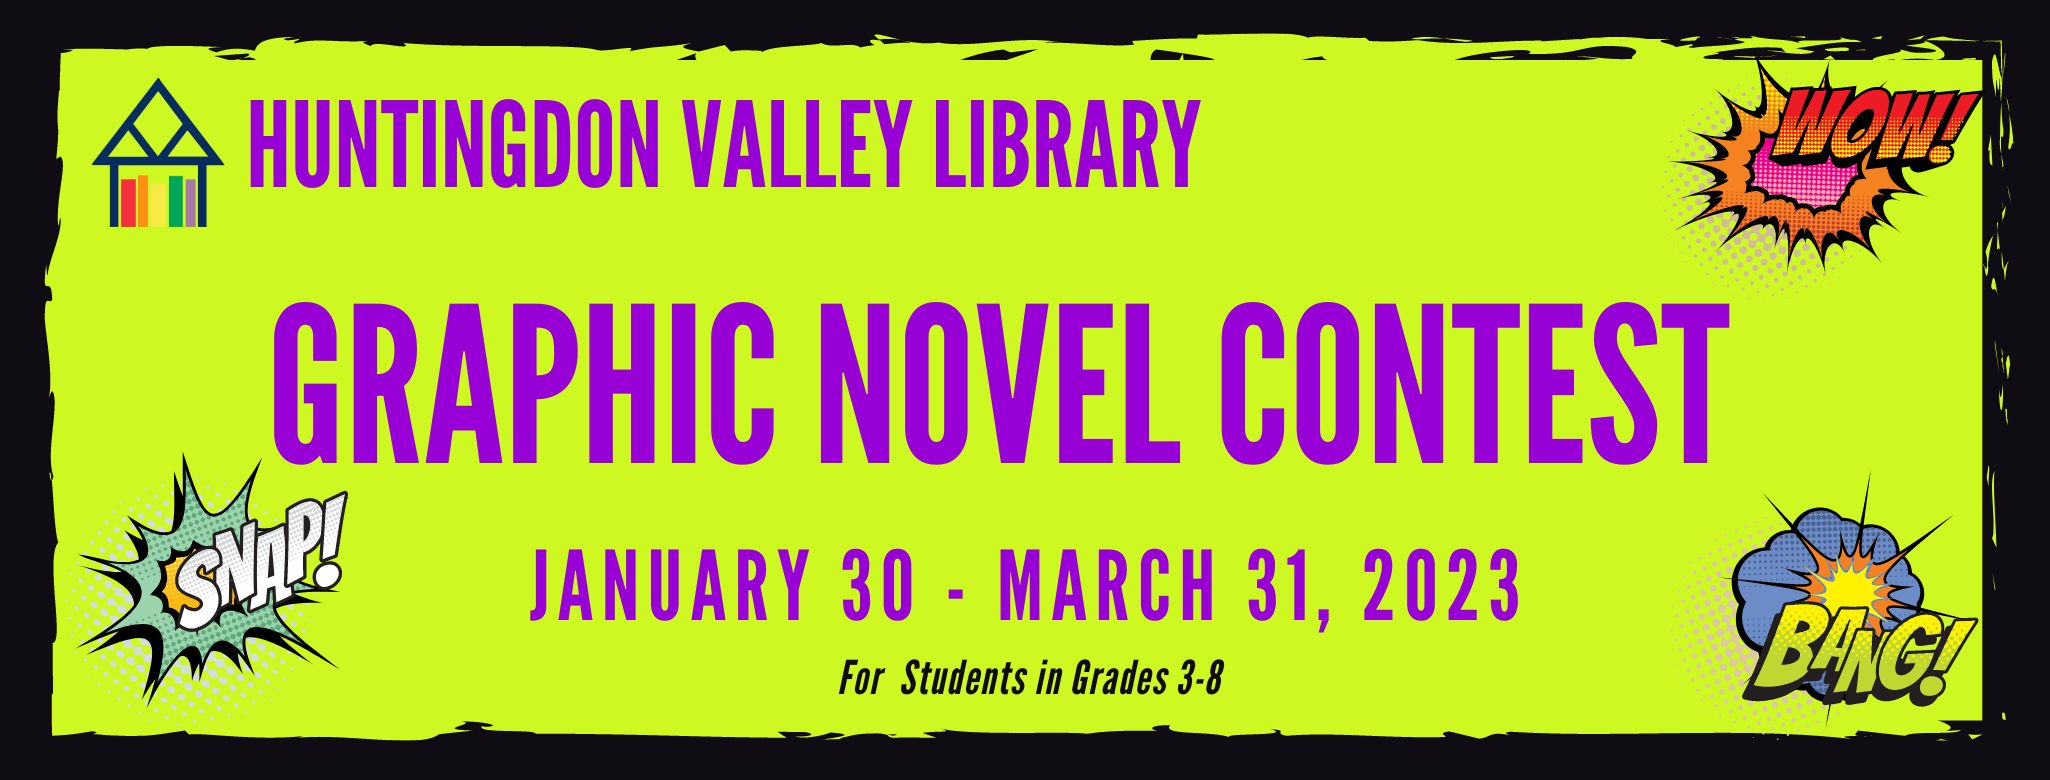 Graphic Novel Contest Huntingdon Valley Library